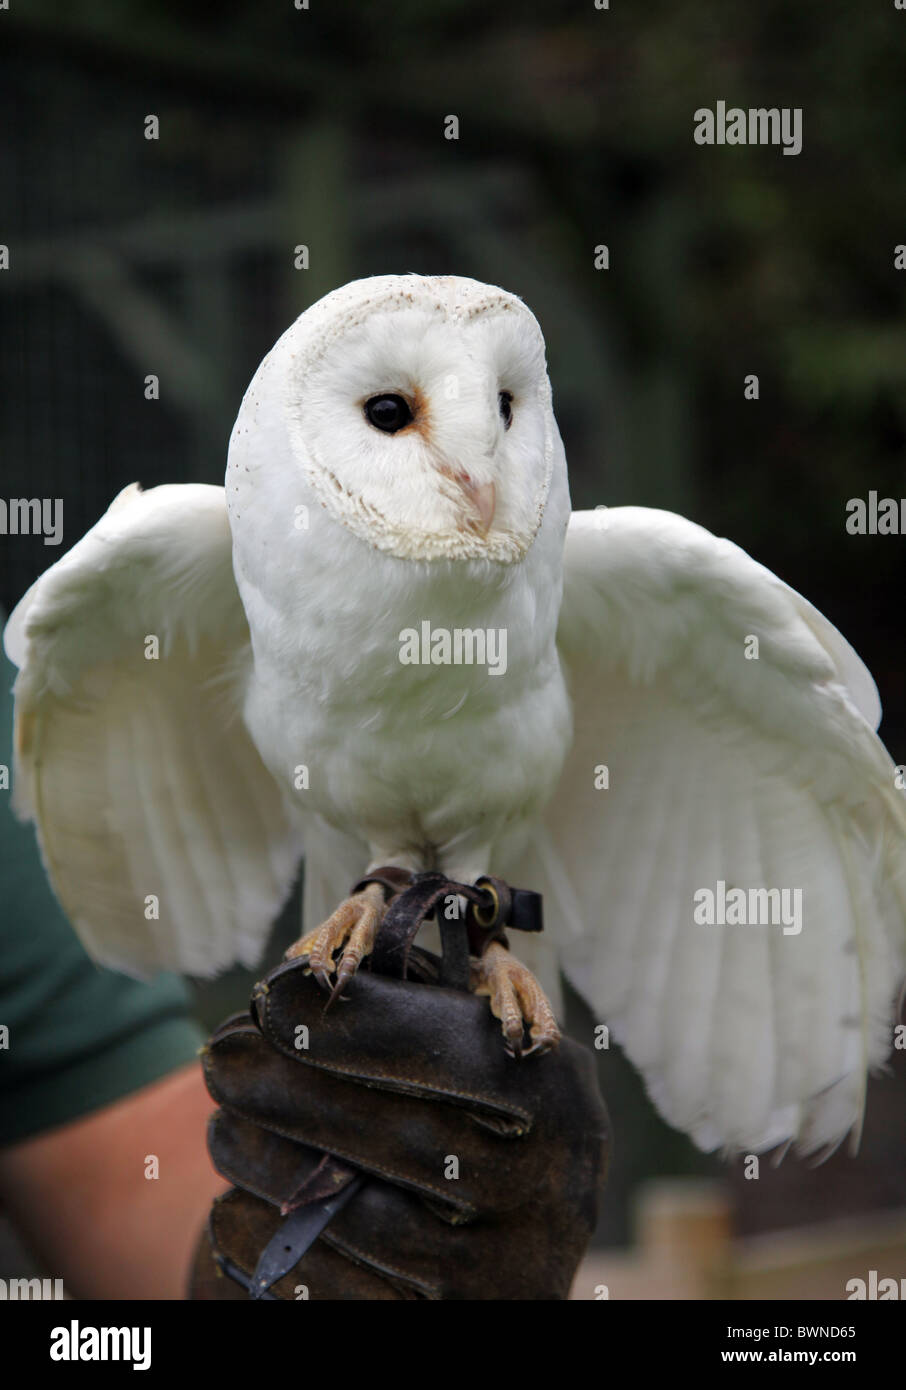 WHITE OWL MINSTER FALCONRY SUTTON-ON-THE FOREST SUTTON-ON-THE-FOREST YORK NORTH YORKSHIRE SUTTON-ON-THE FOREST YORK 21 August Stock Photo